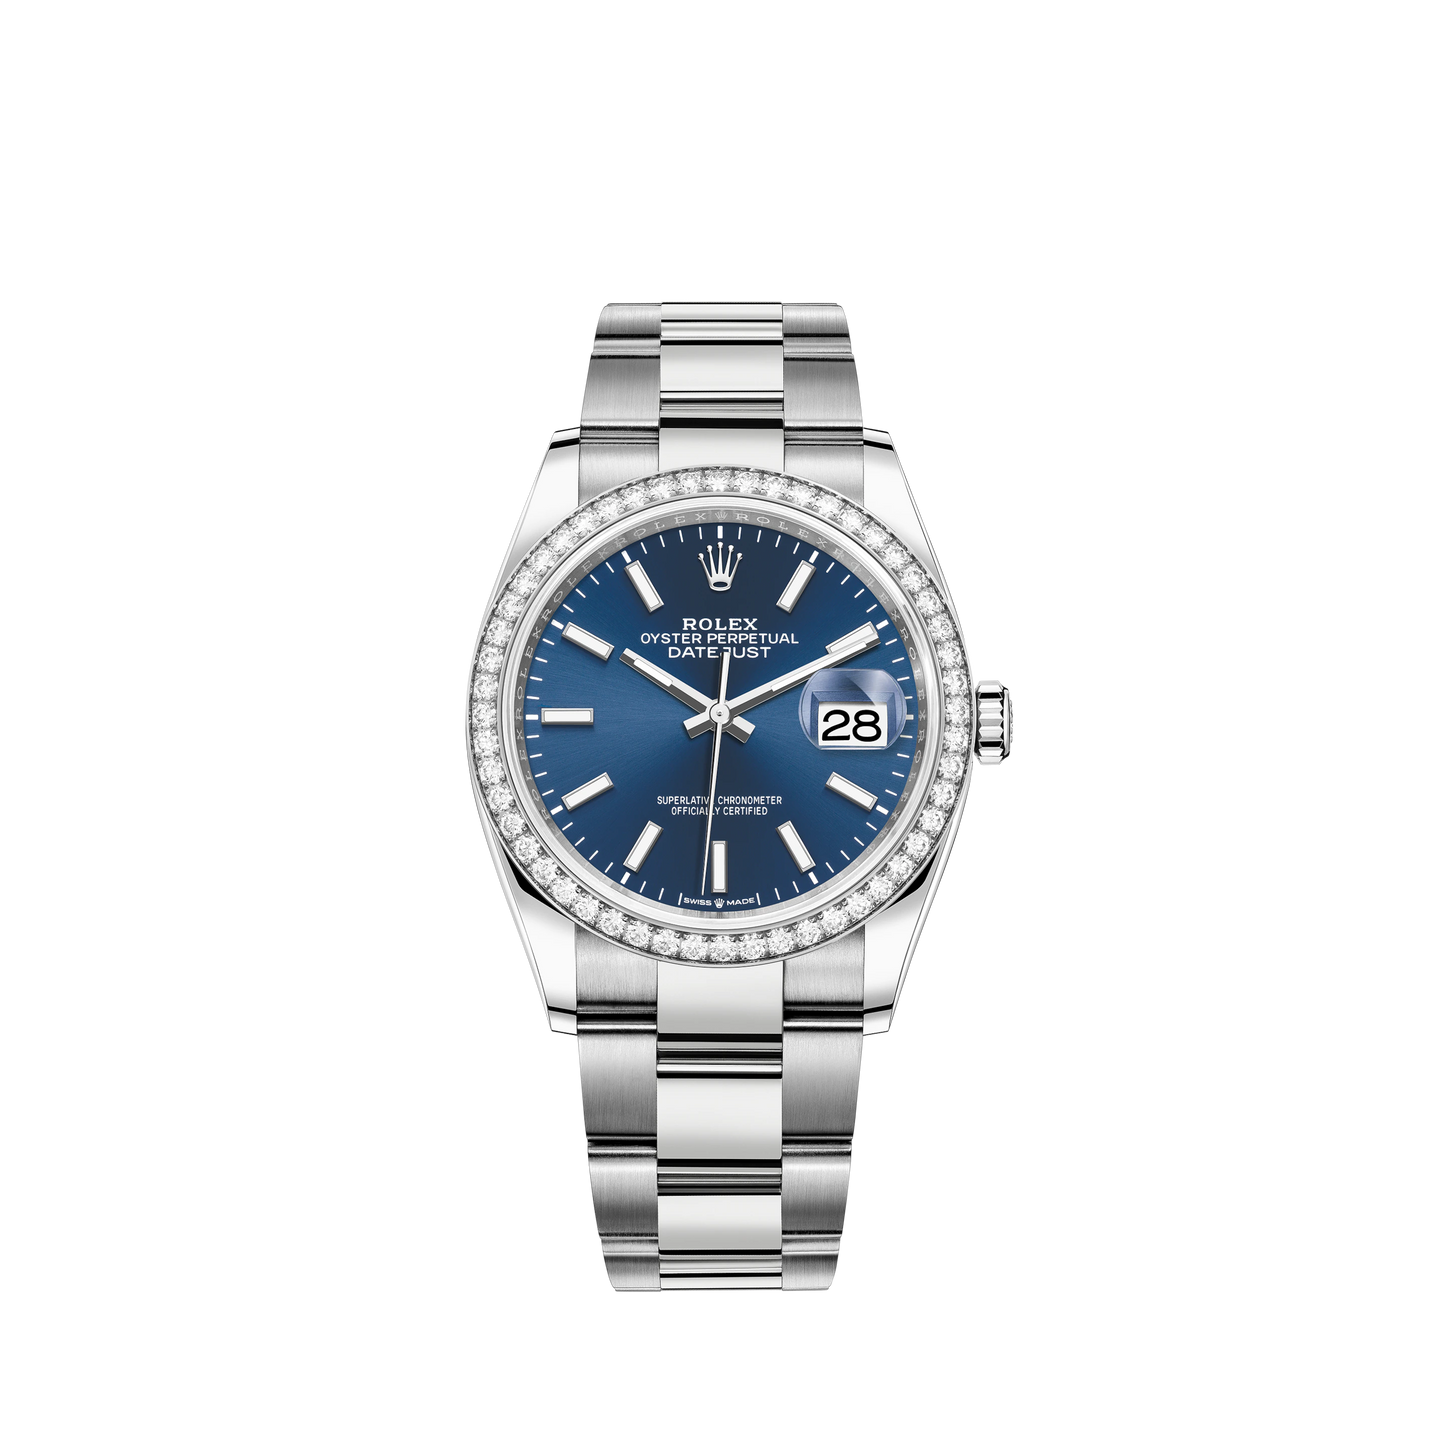 Datejust 36 36mm Oystersteel and White Gold Oyster Bracelet Bright Blue Dial Diamond-set Bezel